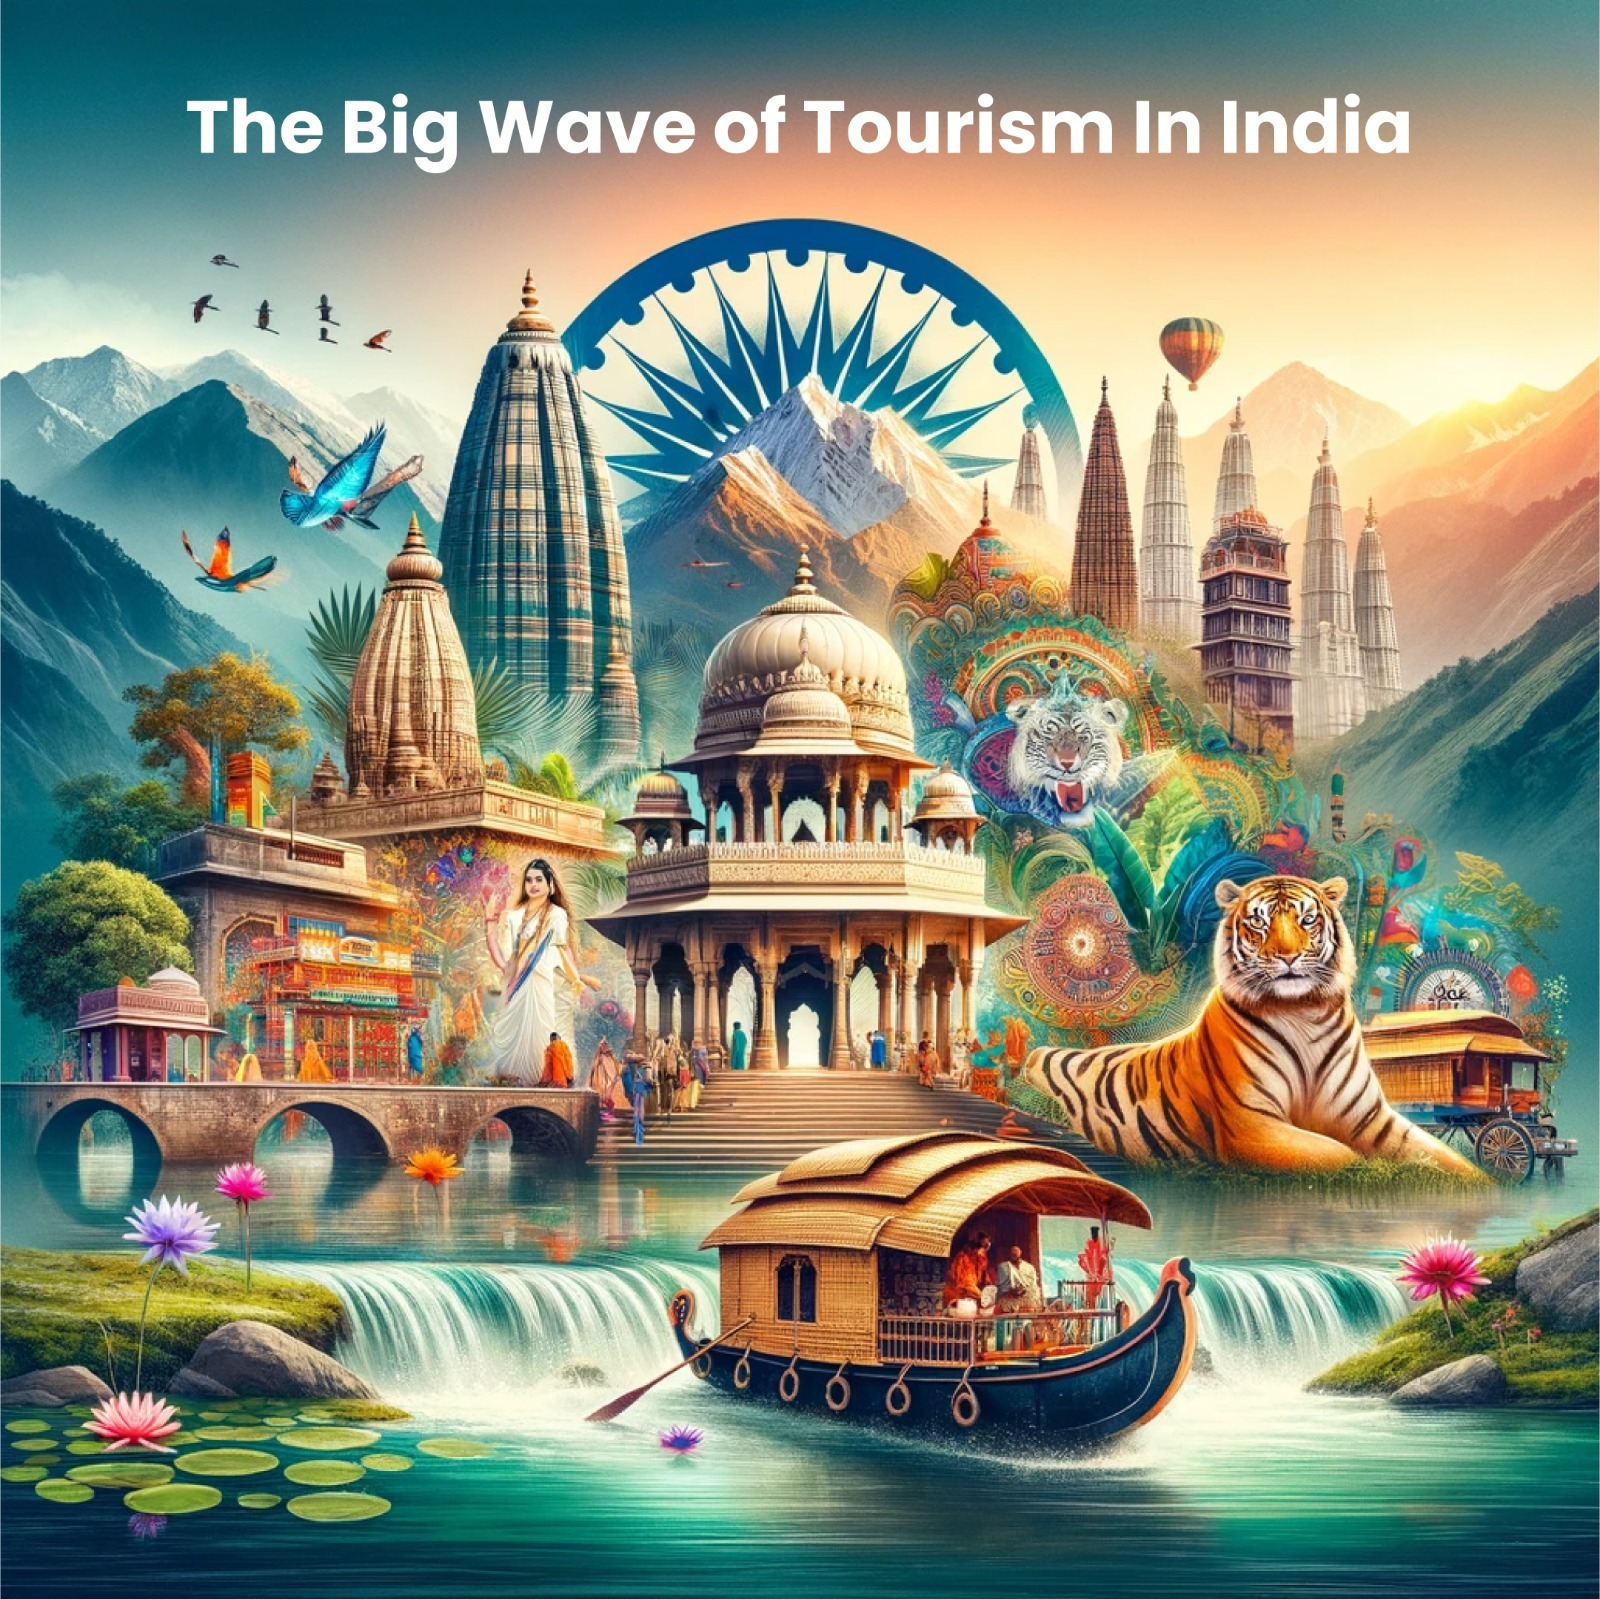 The Big Wave of Tourism in India